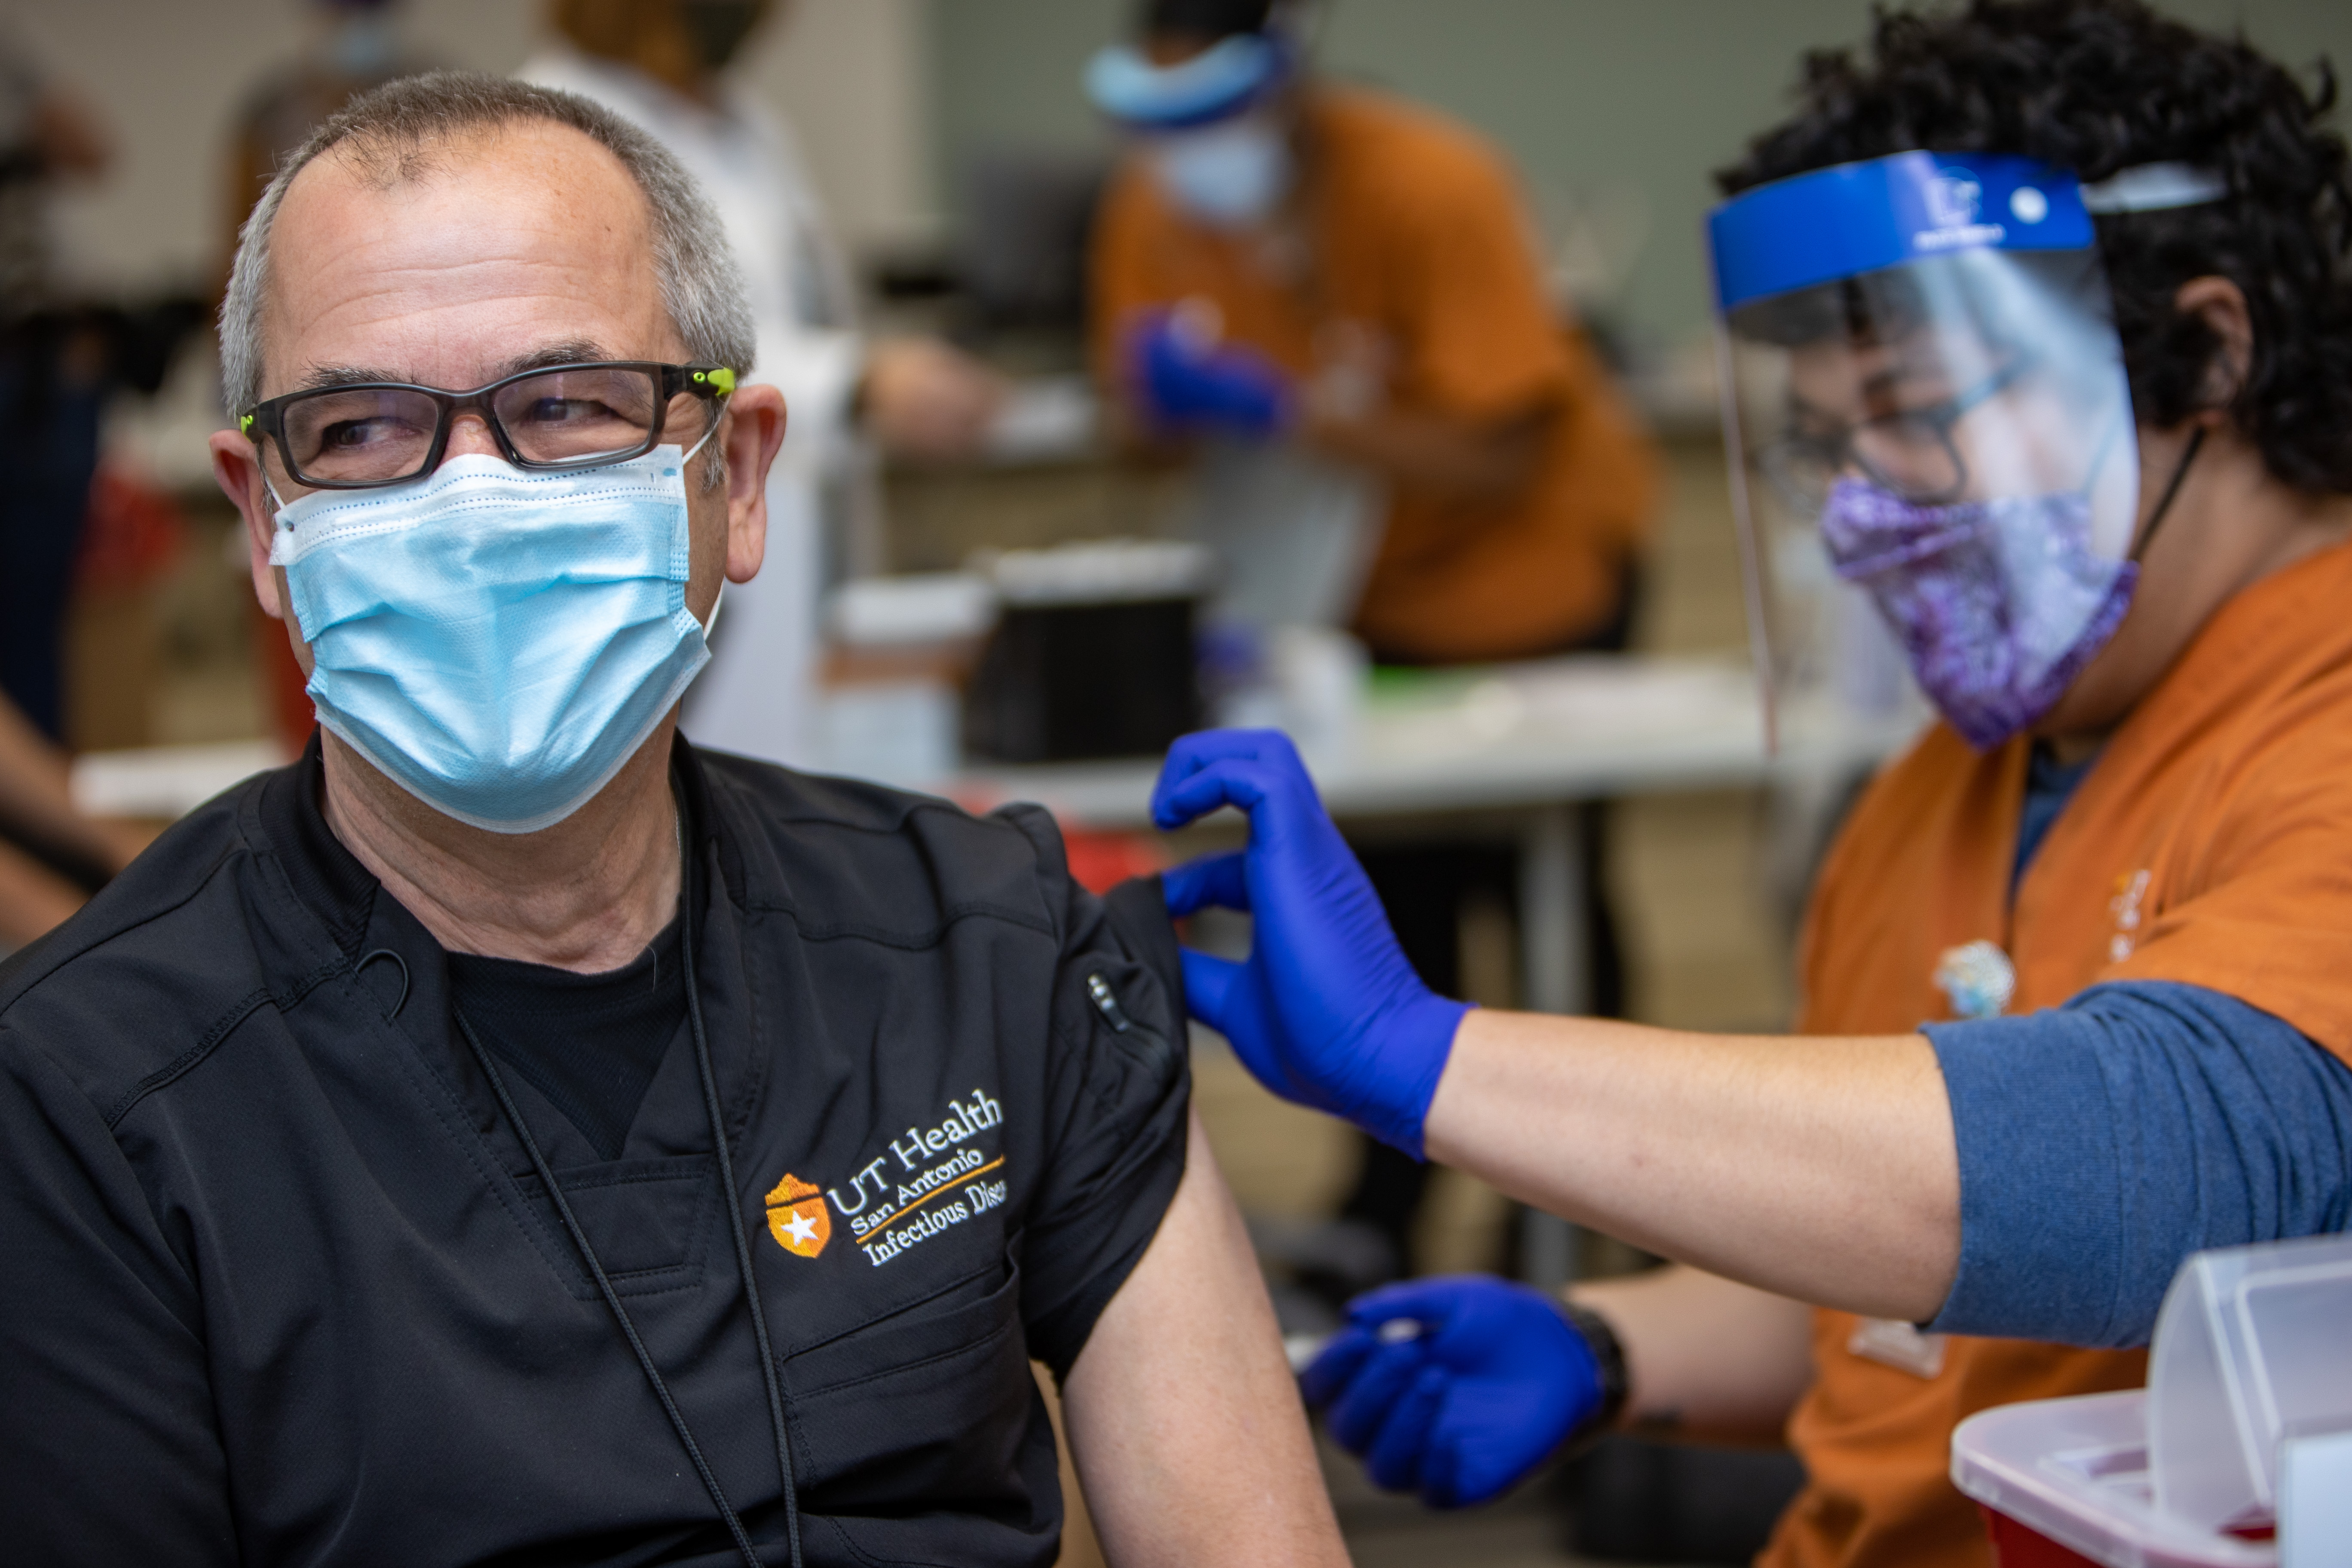 Dr. Thomas Patterson, Professor of Medicine and Division Chief of Infectious Diseases at the UT Health San Antonio was one of the first to receive the COVID-19 Pfizer vaccines available in the state of Texas.